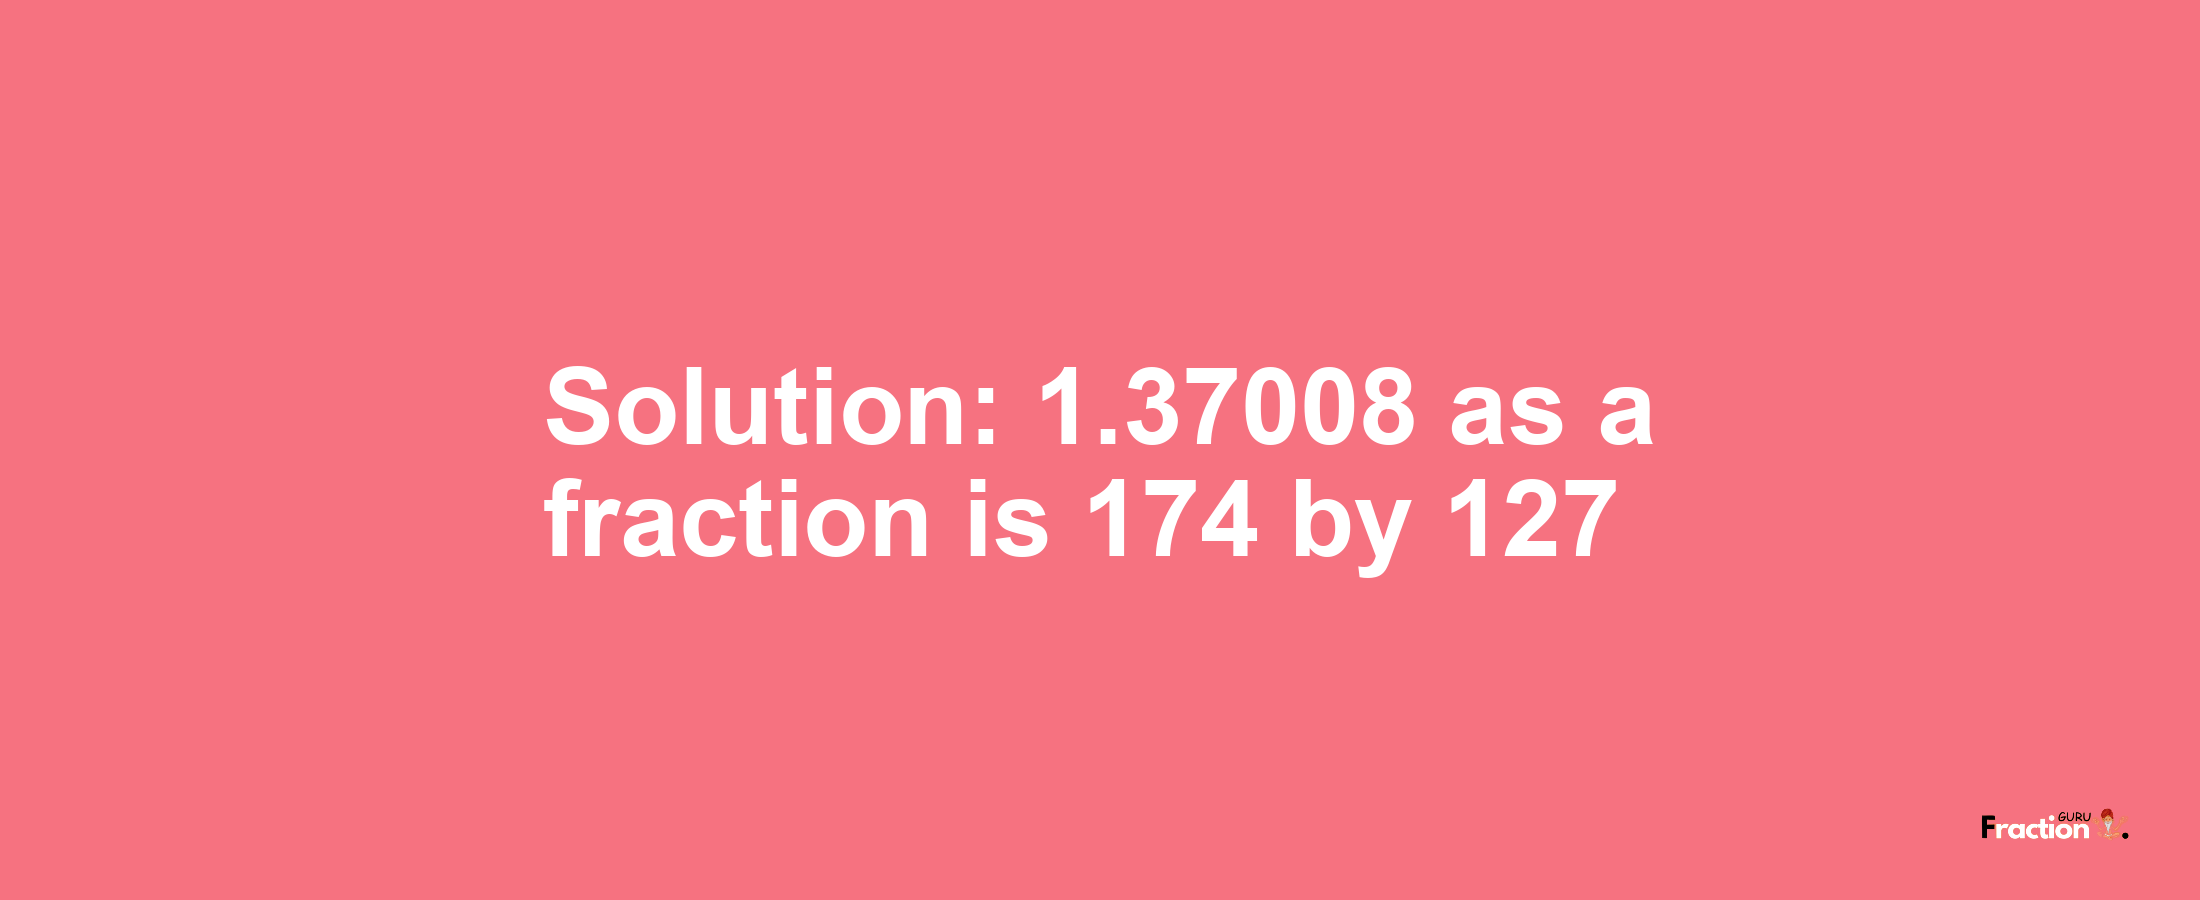 Solution:1.37008 as a fraction is 174/127